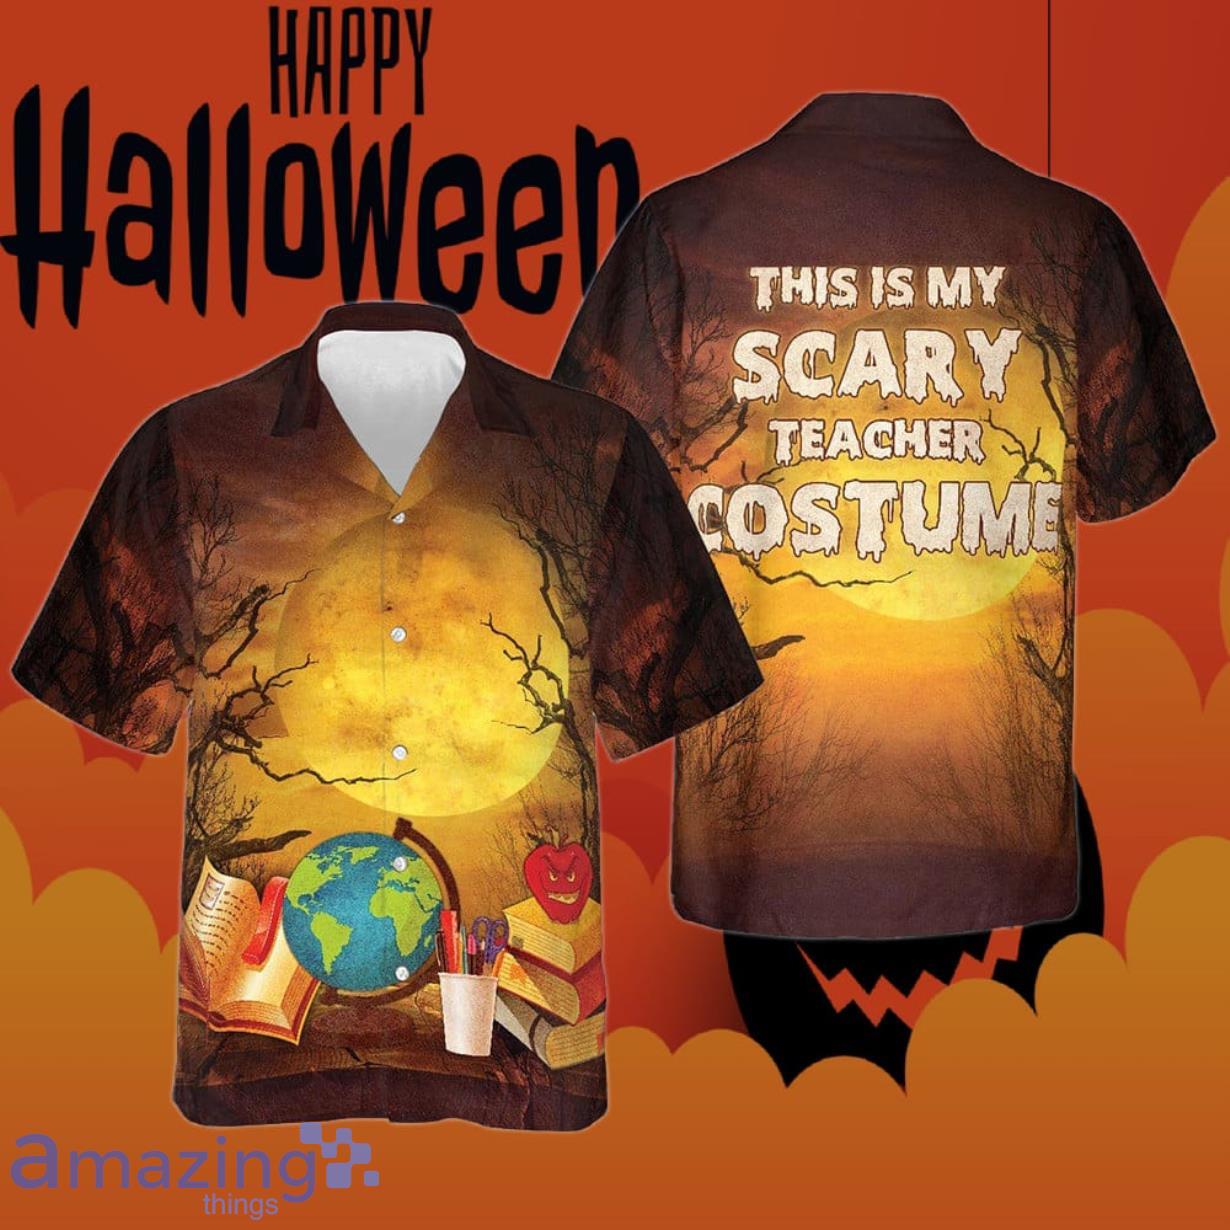 This Is My Scary Teacher Costume for Halloween. Fantastic for